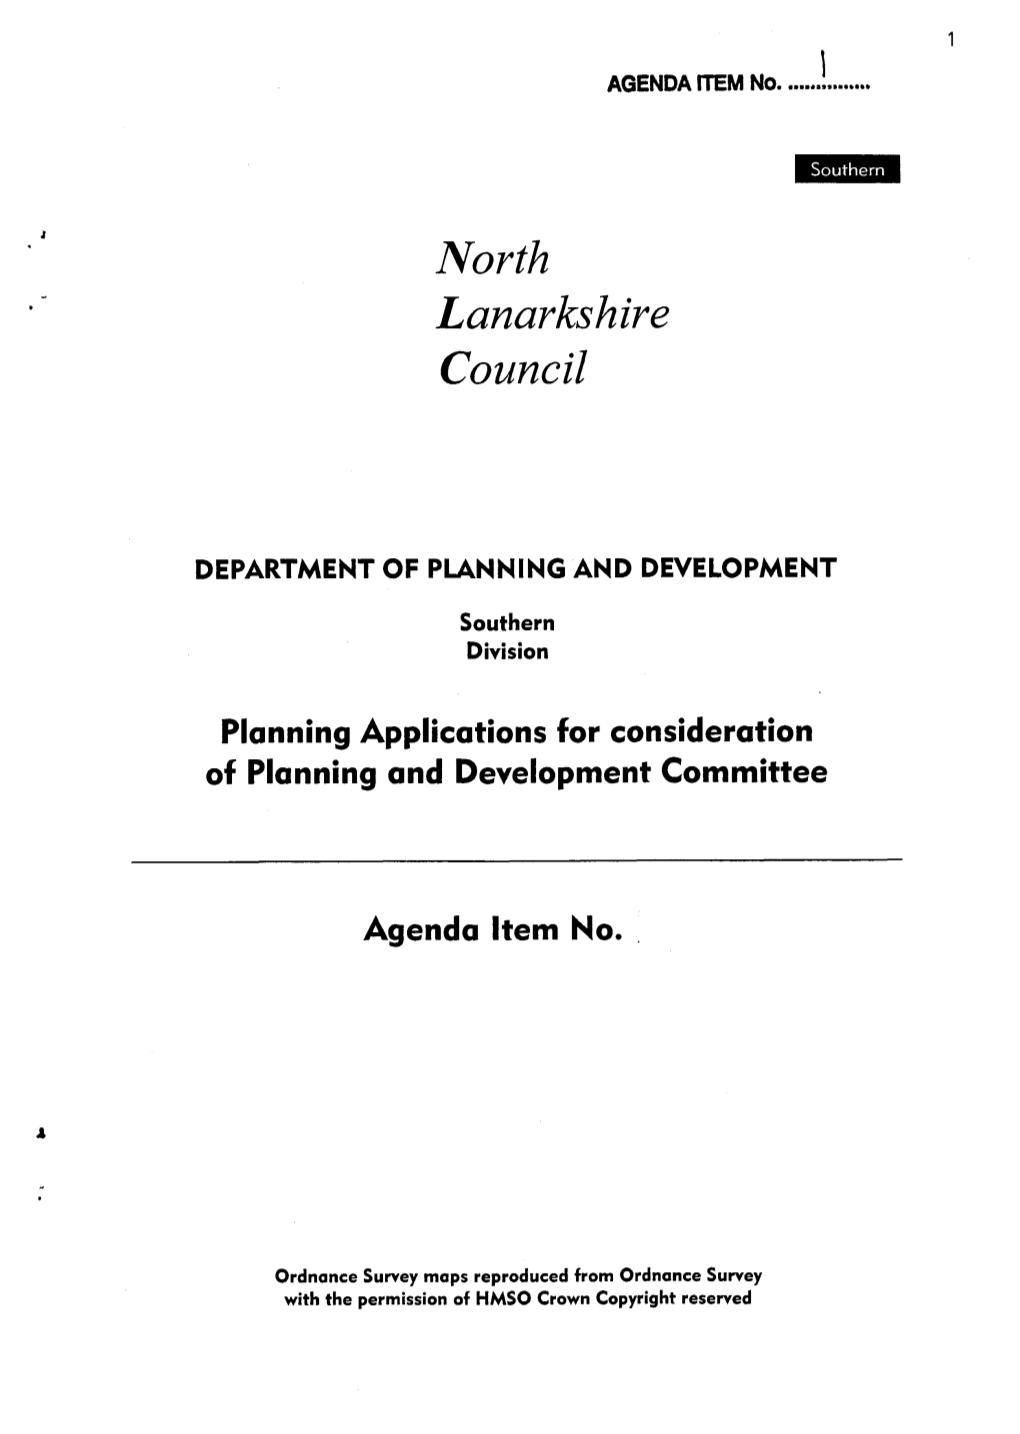 Planning Applications for Consideration of Planning and Development Committee